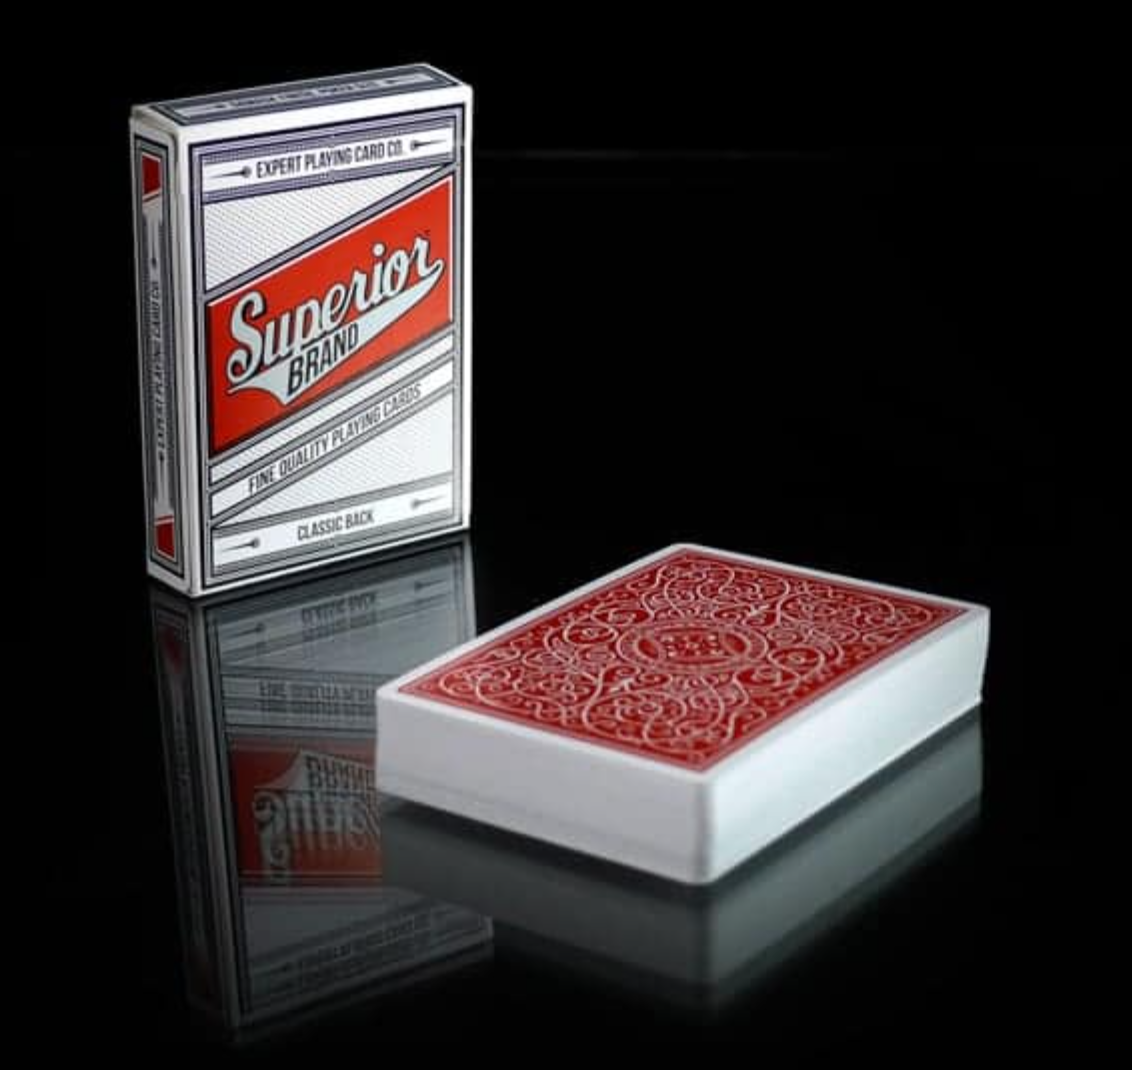 Superior Brand Classic Back Red Invisible Deck Playing Cards with EPCC Seal